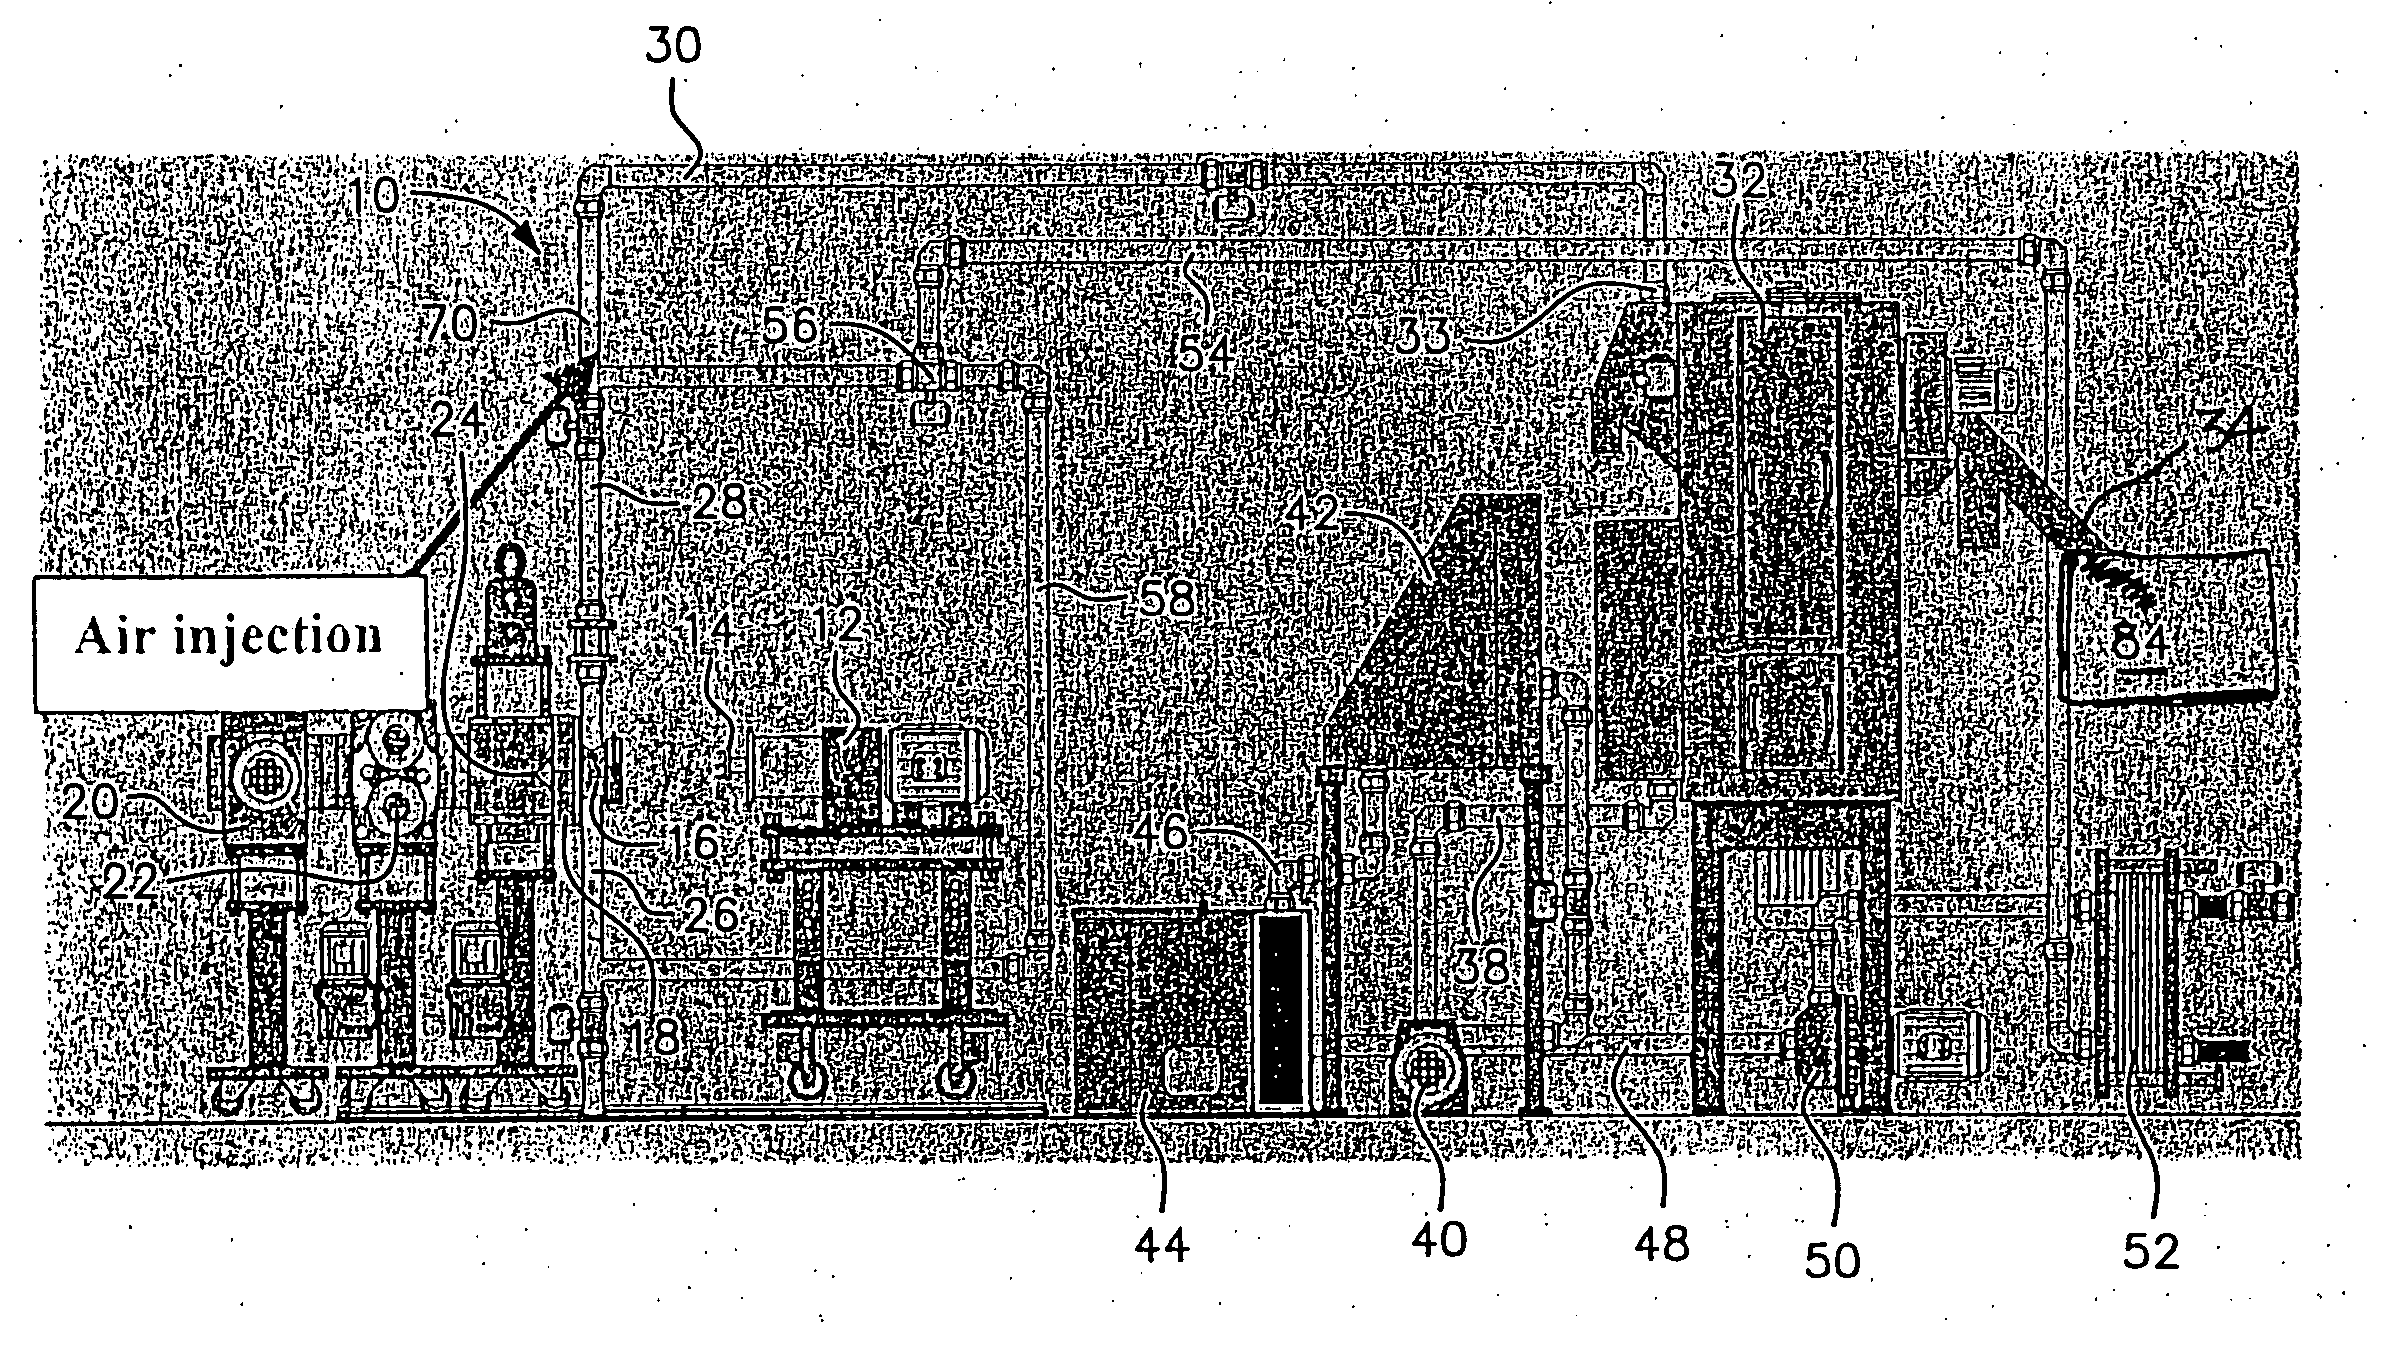 Method and apparatus for making crystalline PET pellets